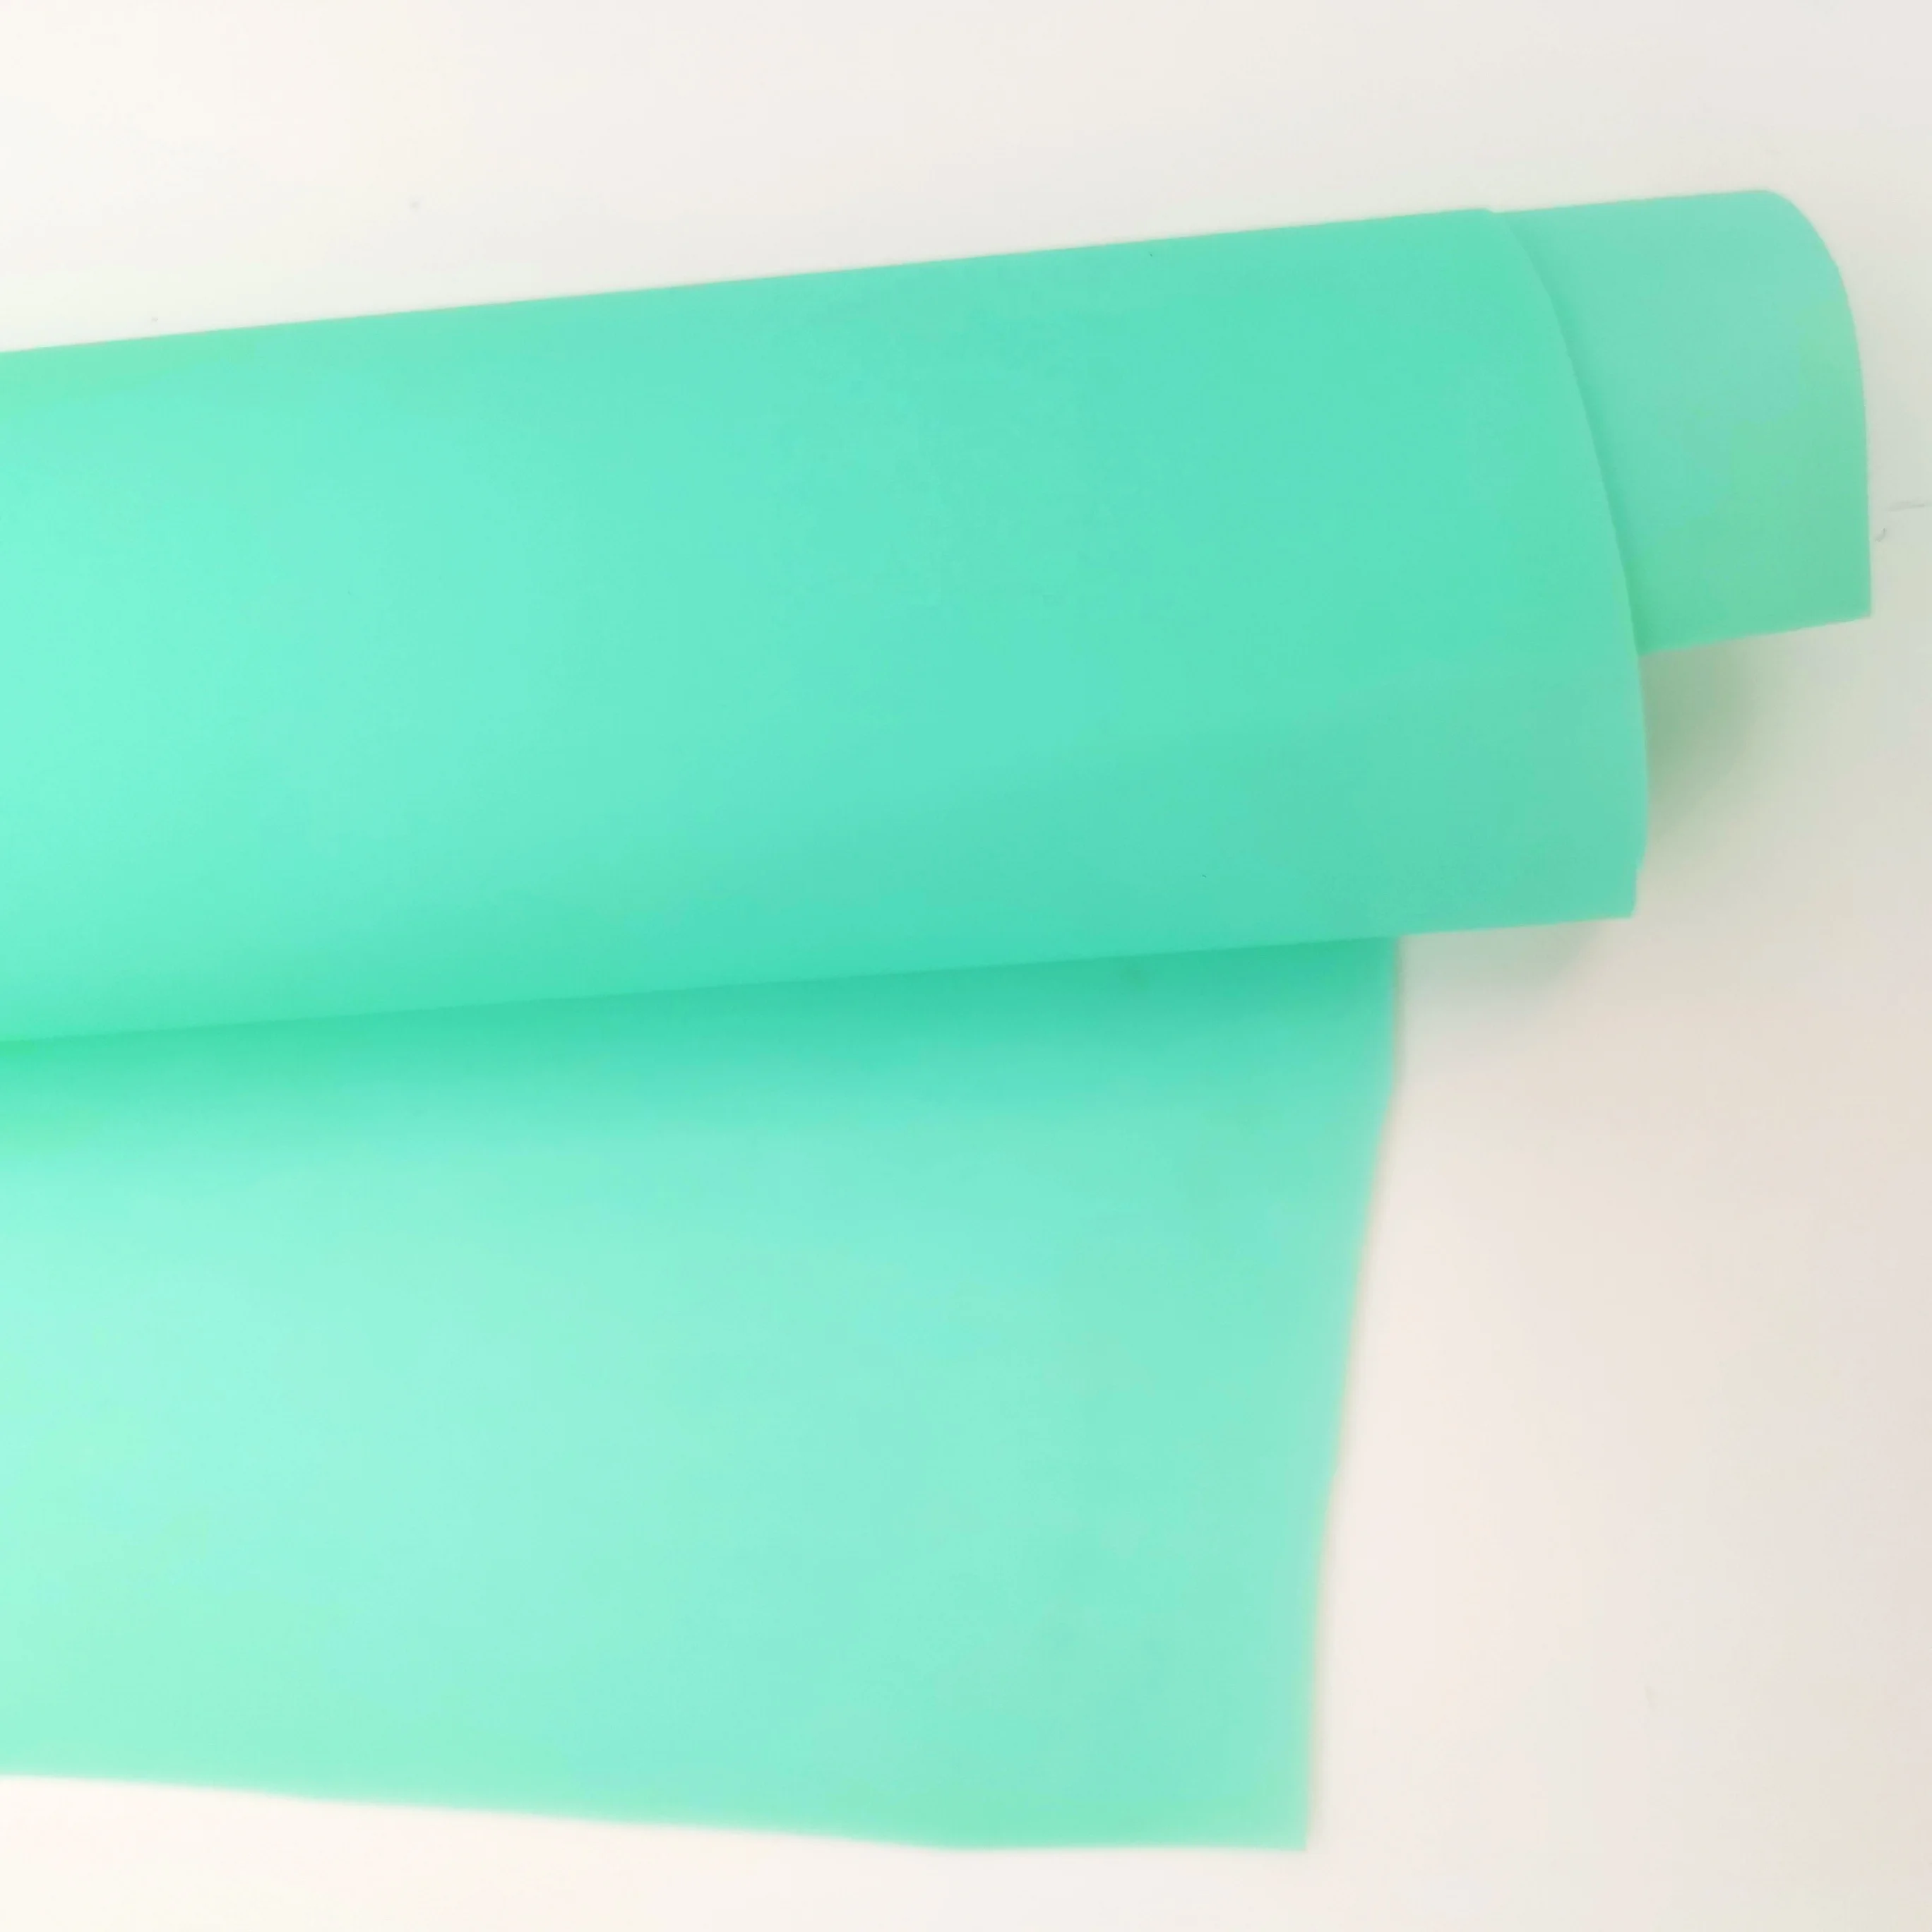 thick Crystal jelly colorful PVC acrylic plastic film,for jelly bags and decoration 0.9MM